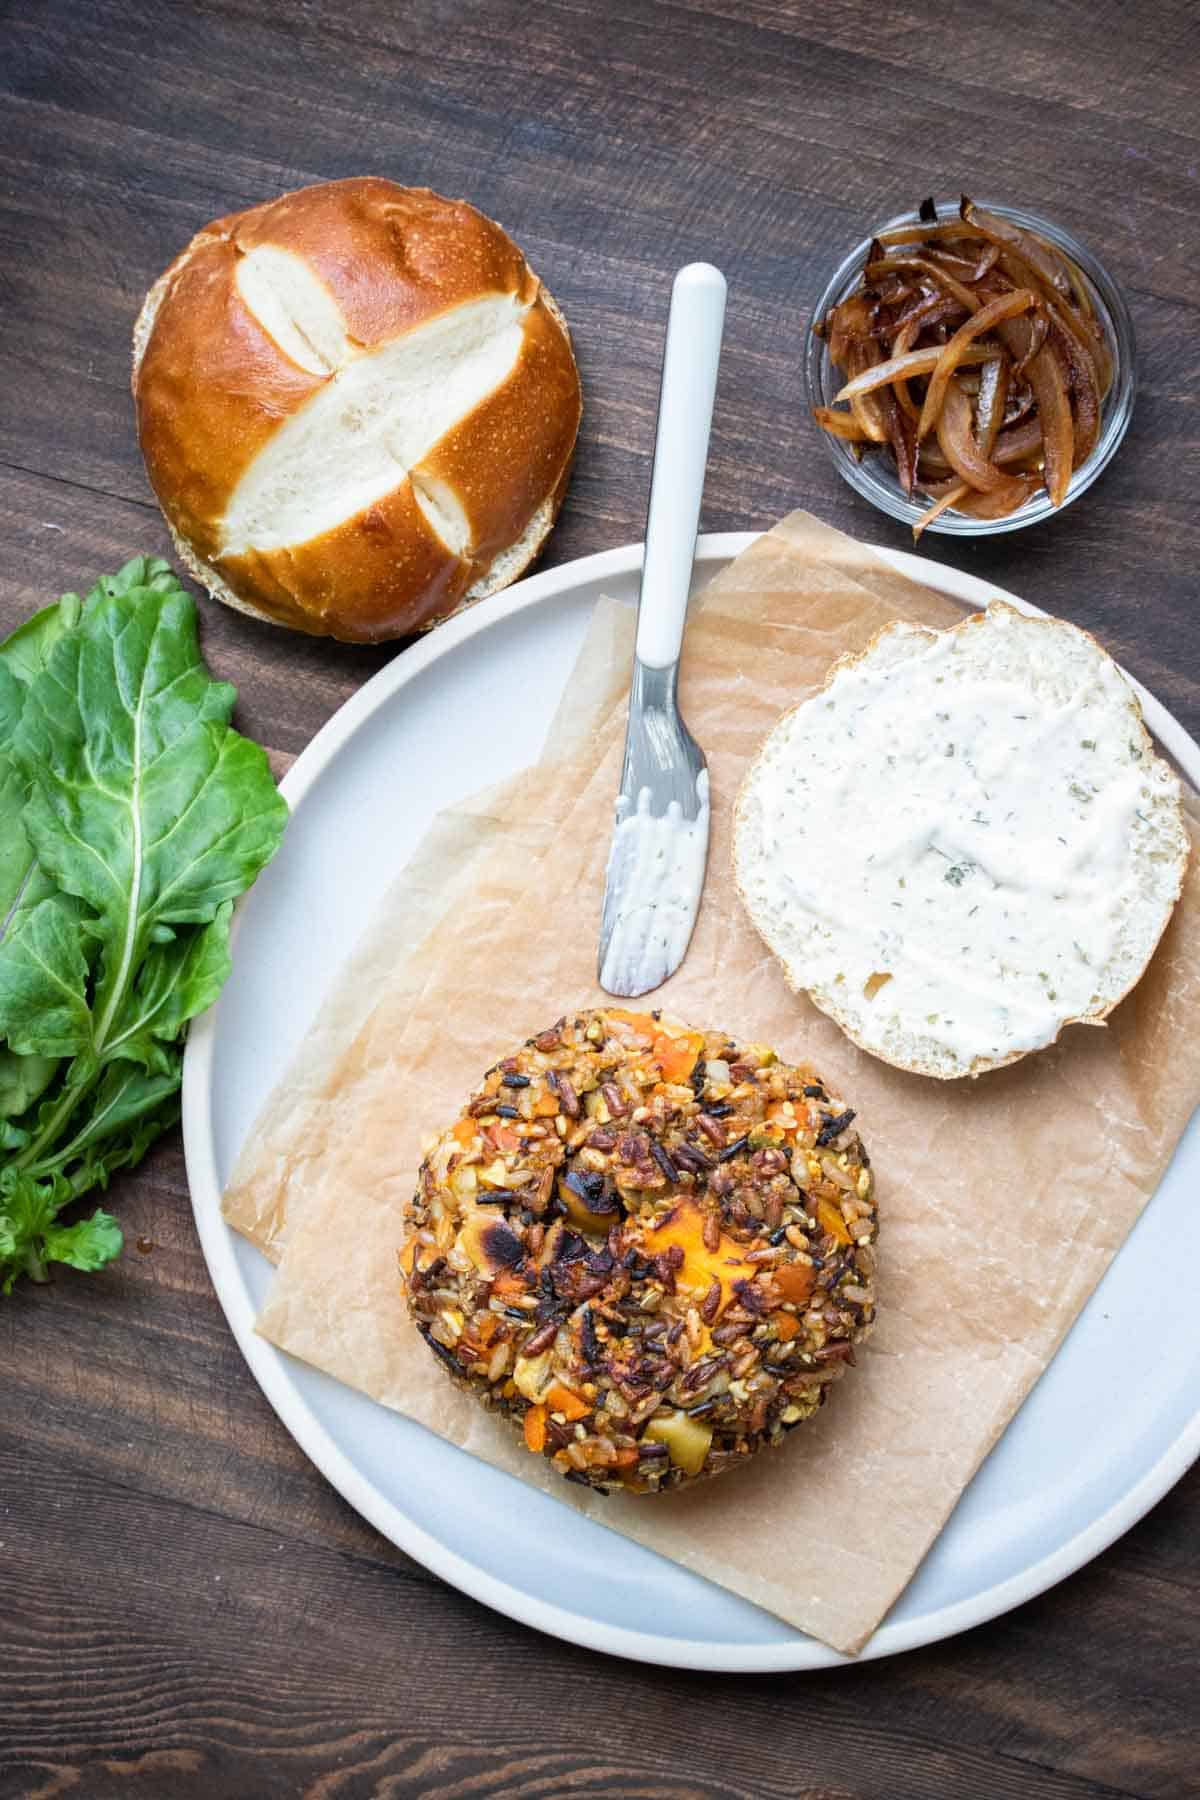 Top view of open faced butternut squash burger on a while plate.